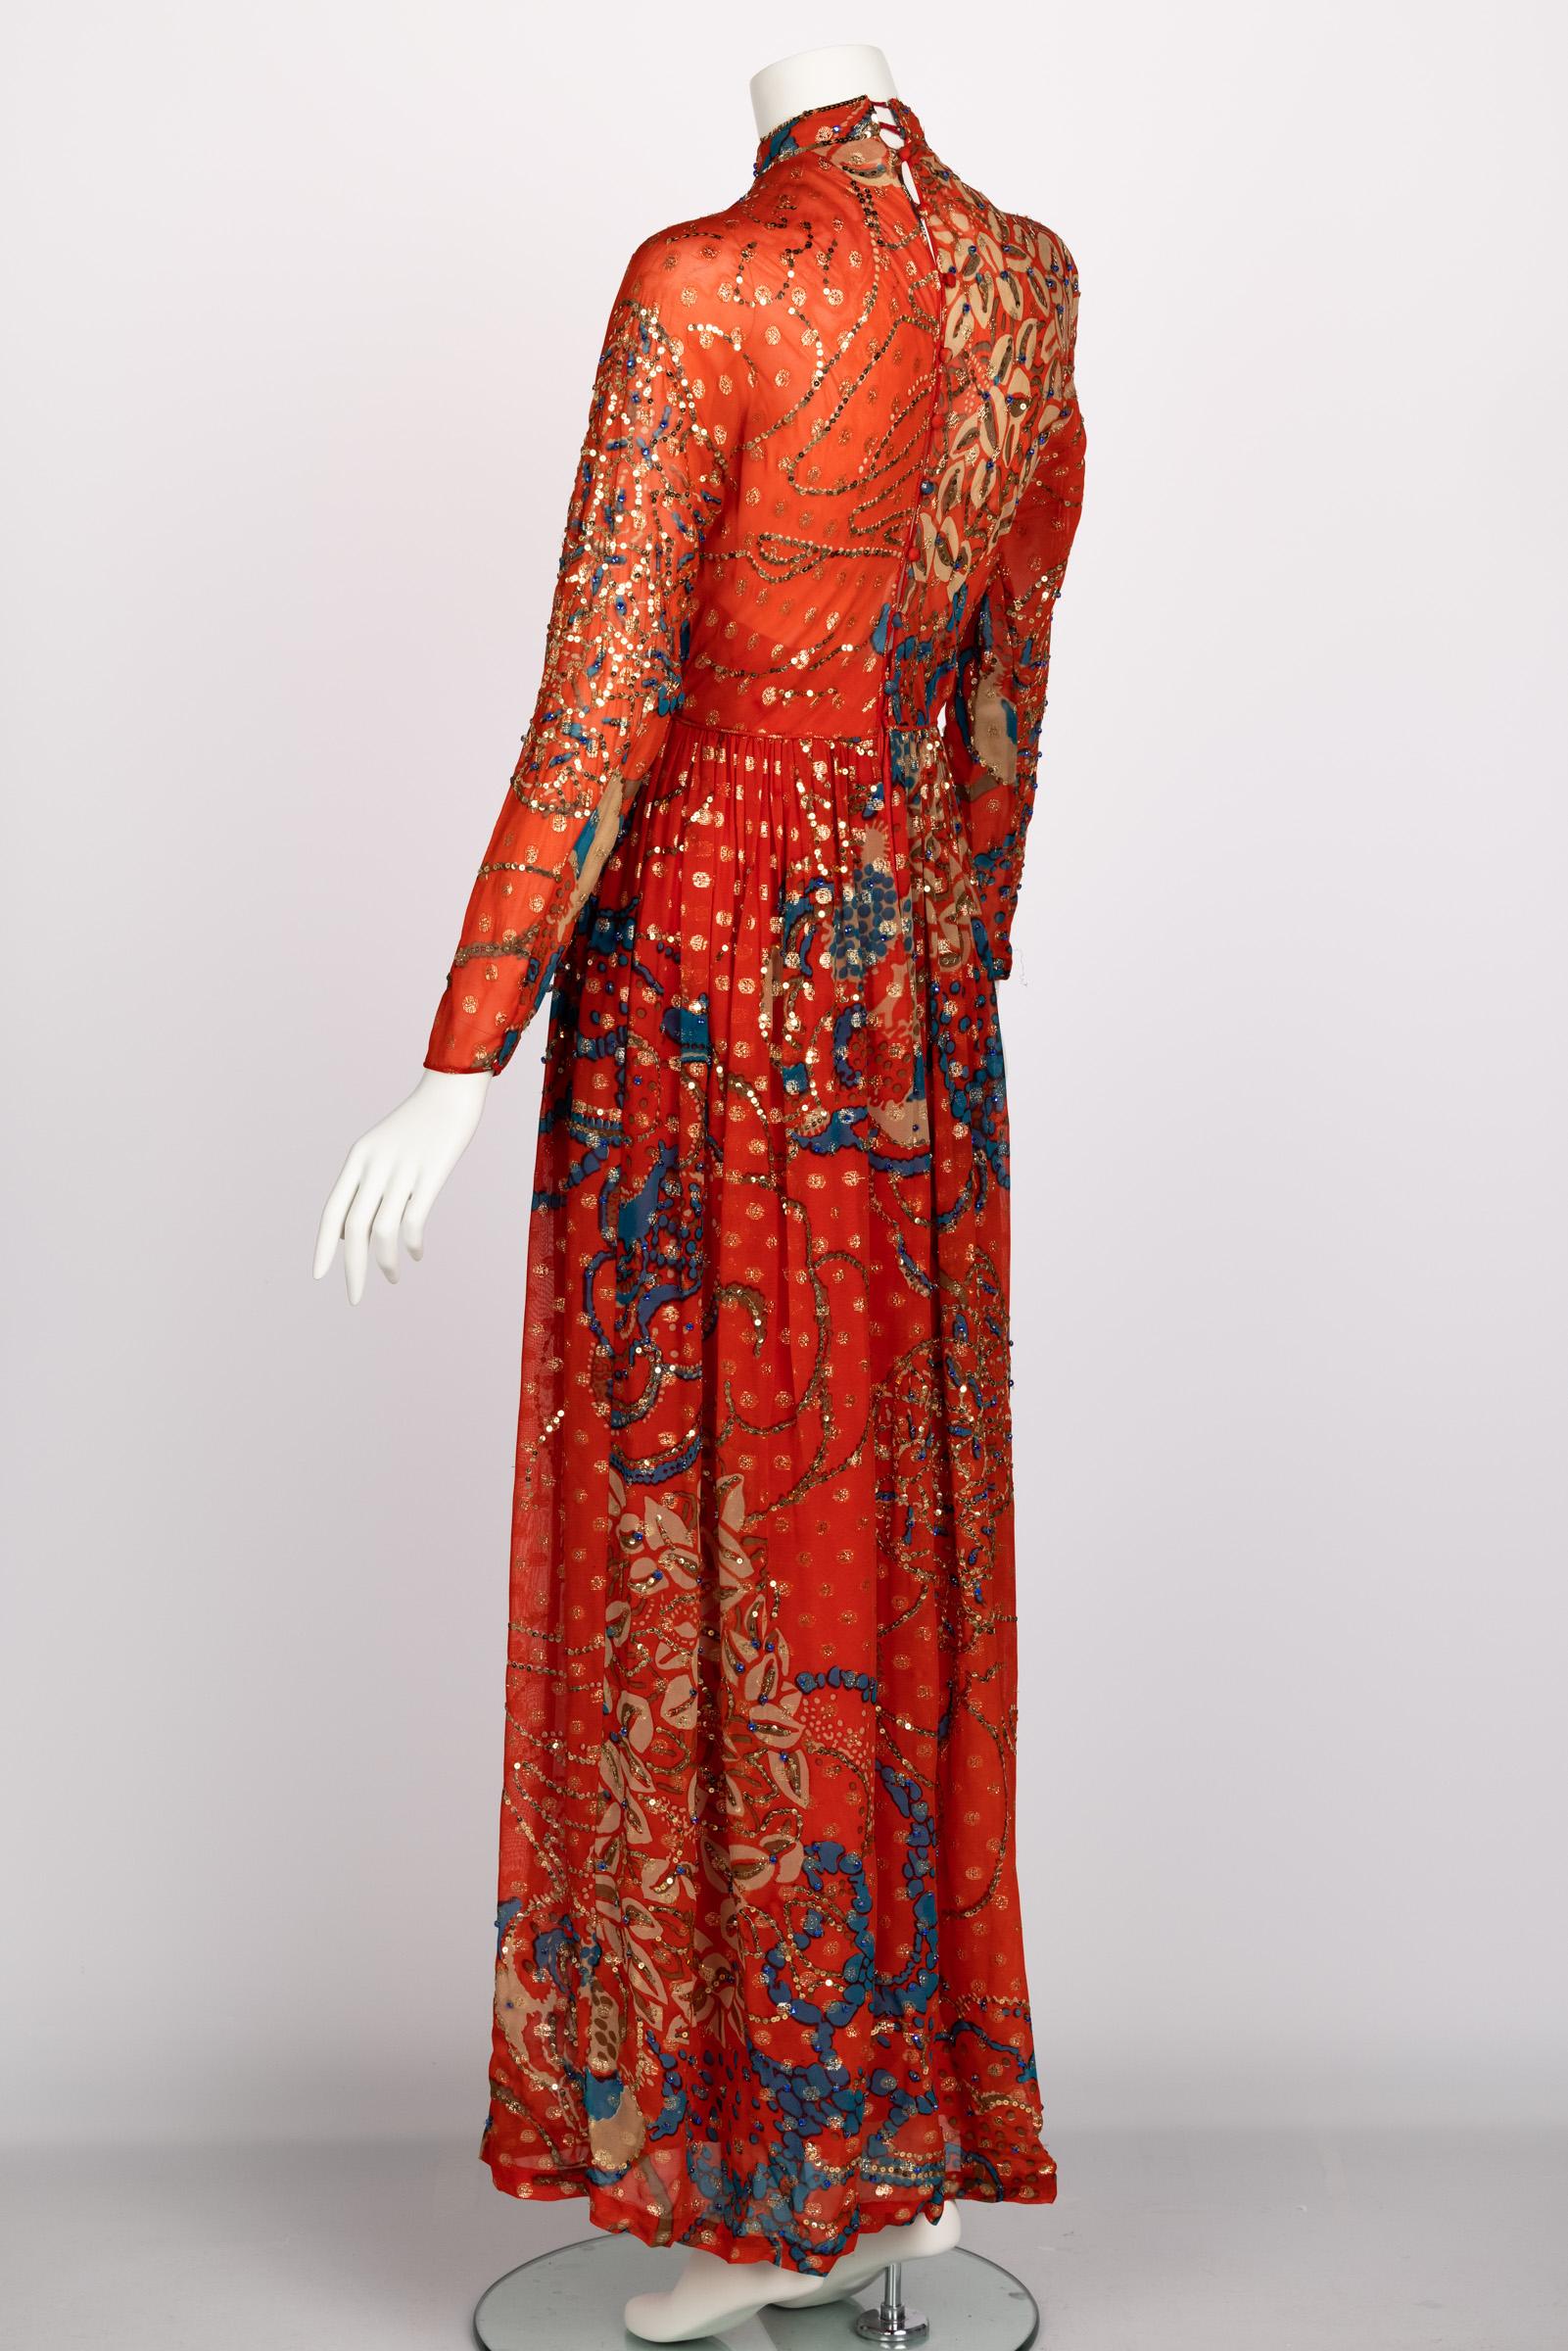 Malcolm Starr Rizkallah Sequined Gold Beaded Red Maxi Dress 1970s For Sale 1